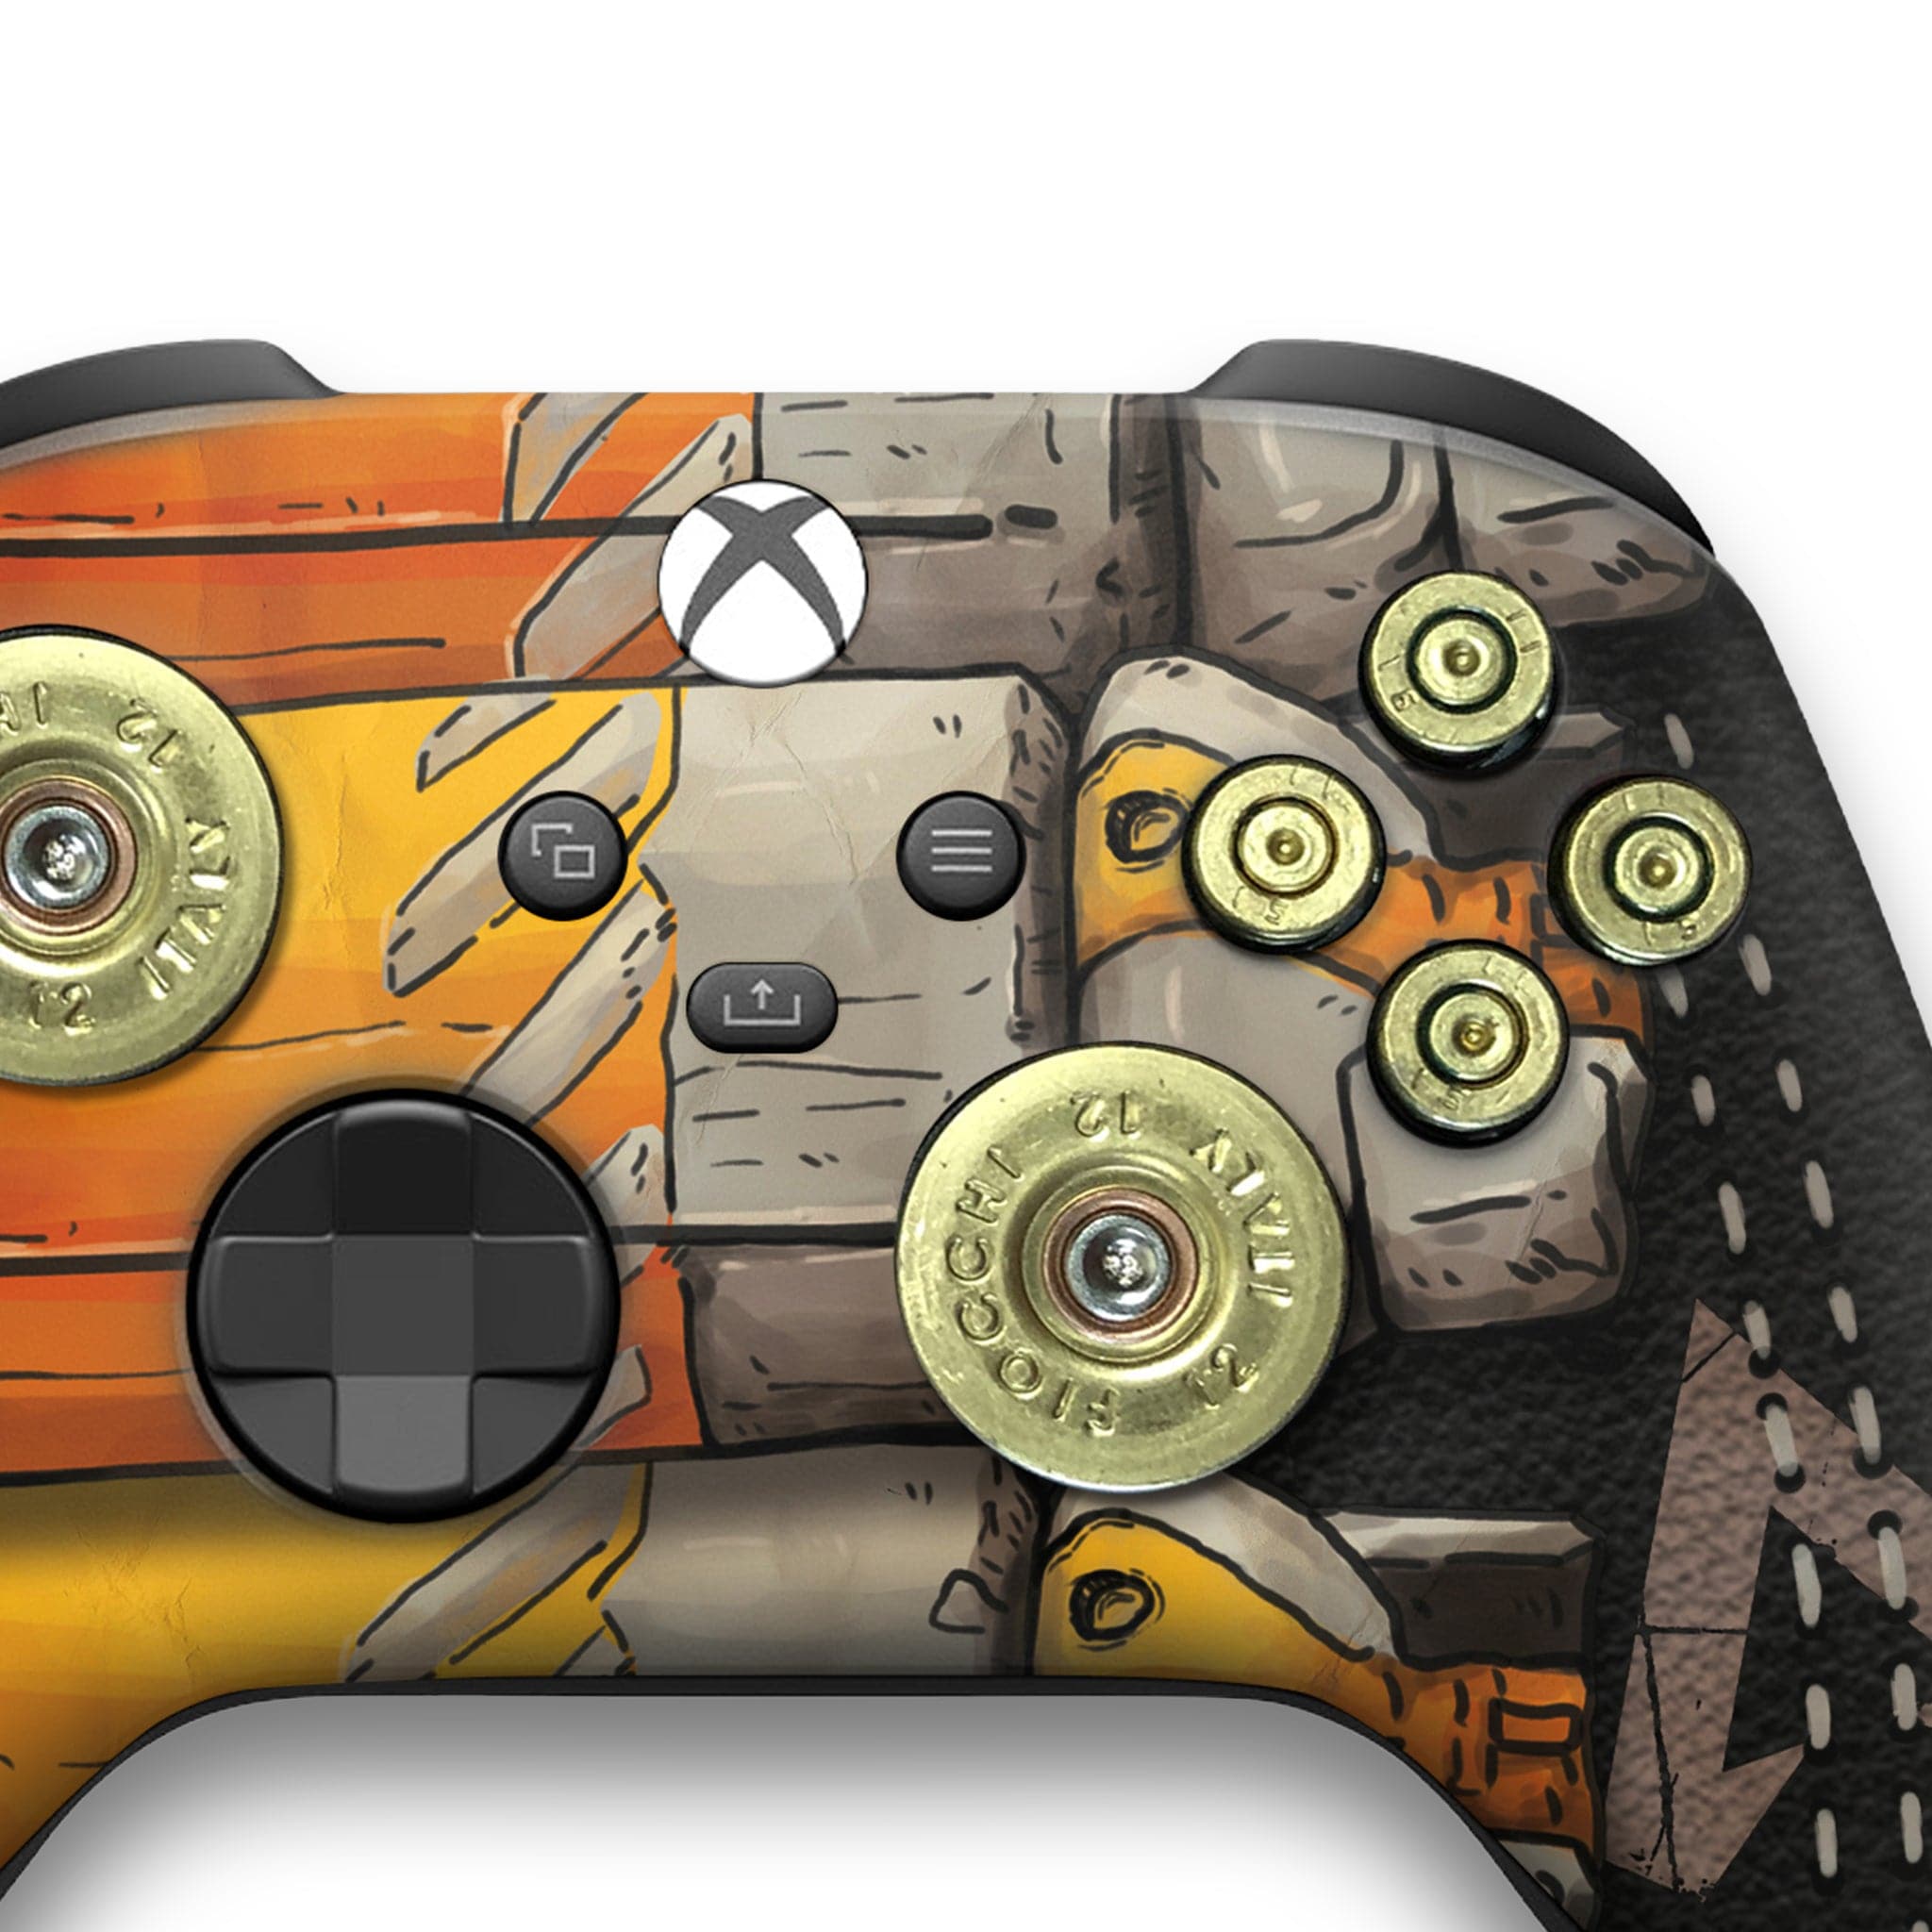 APEX BANGALORE inspired xbox x series controller with bullet buttons